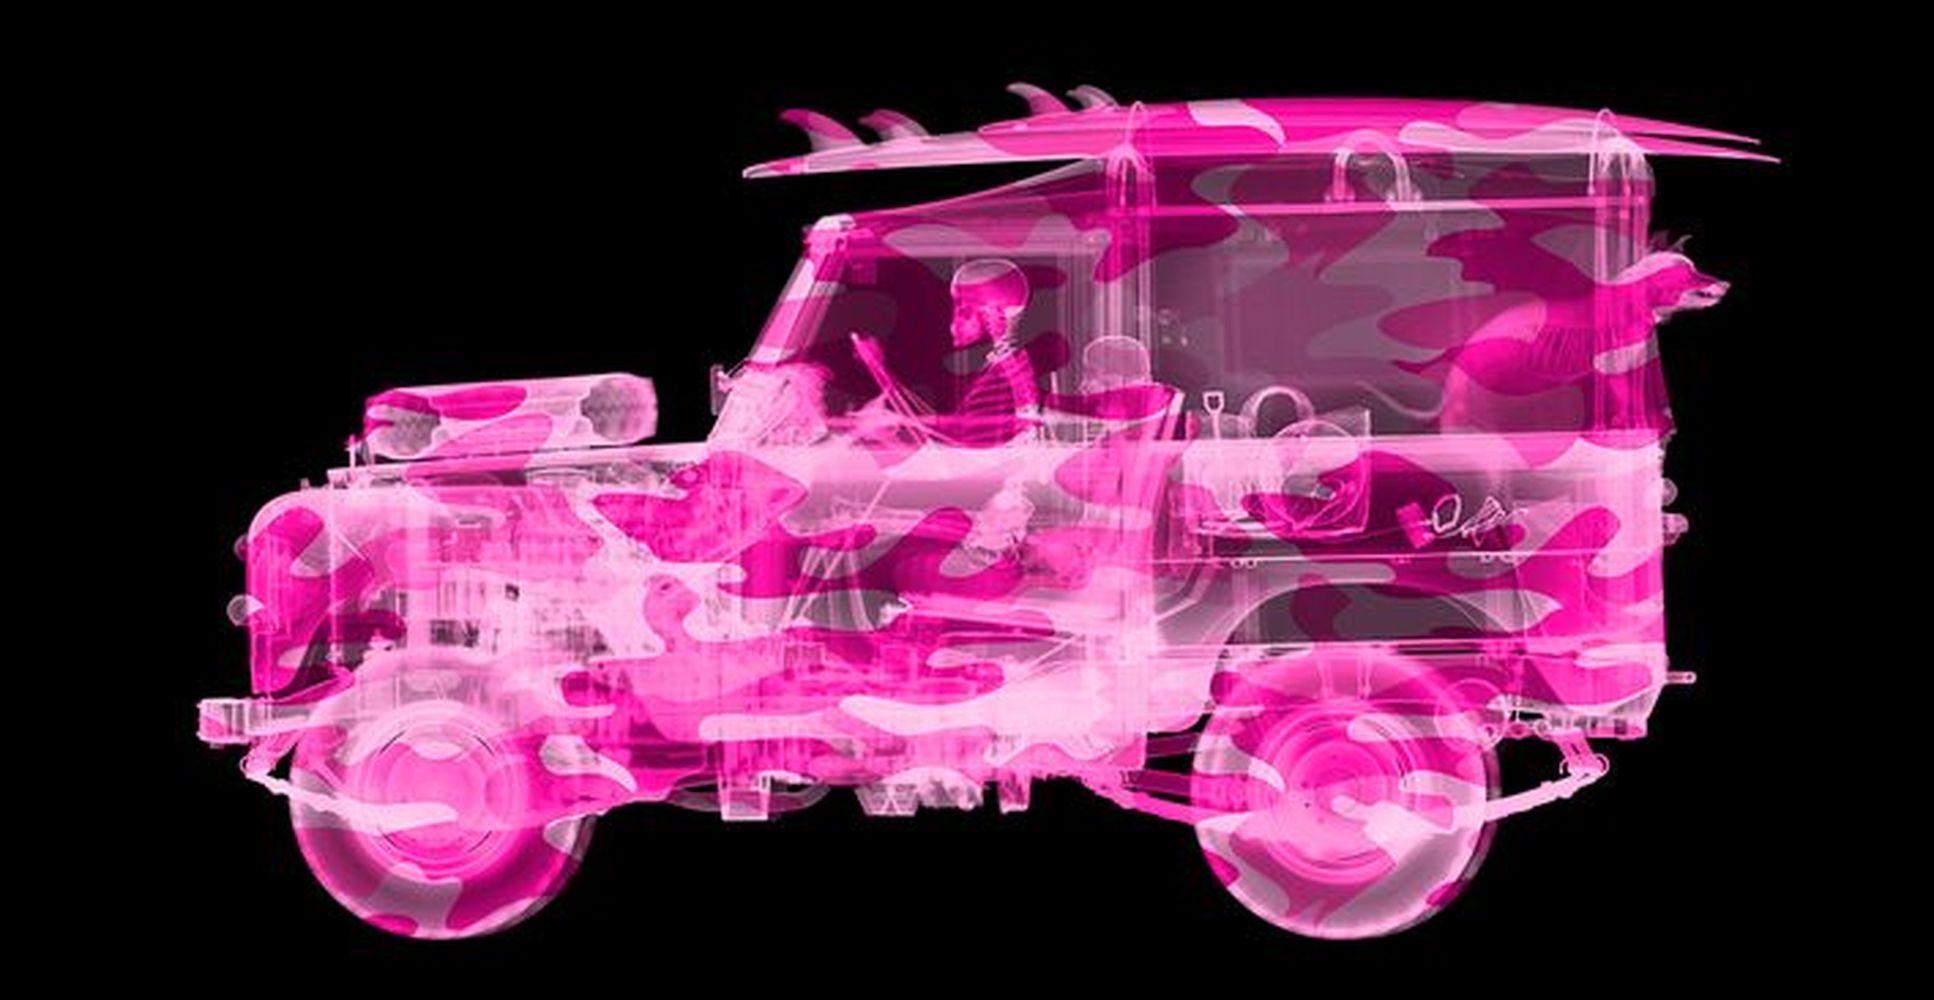 Camouflage Land Rover Surfer
24 x 47 inches (Available in other Sizes) 
X-Ray C-Type print with Diasec frame 
Limited Edition of 15
Acquired from artist's studio, signed recto 

Pink Camouflage X-Ray print of a Land Rover.  Artist Nick Veasey